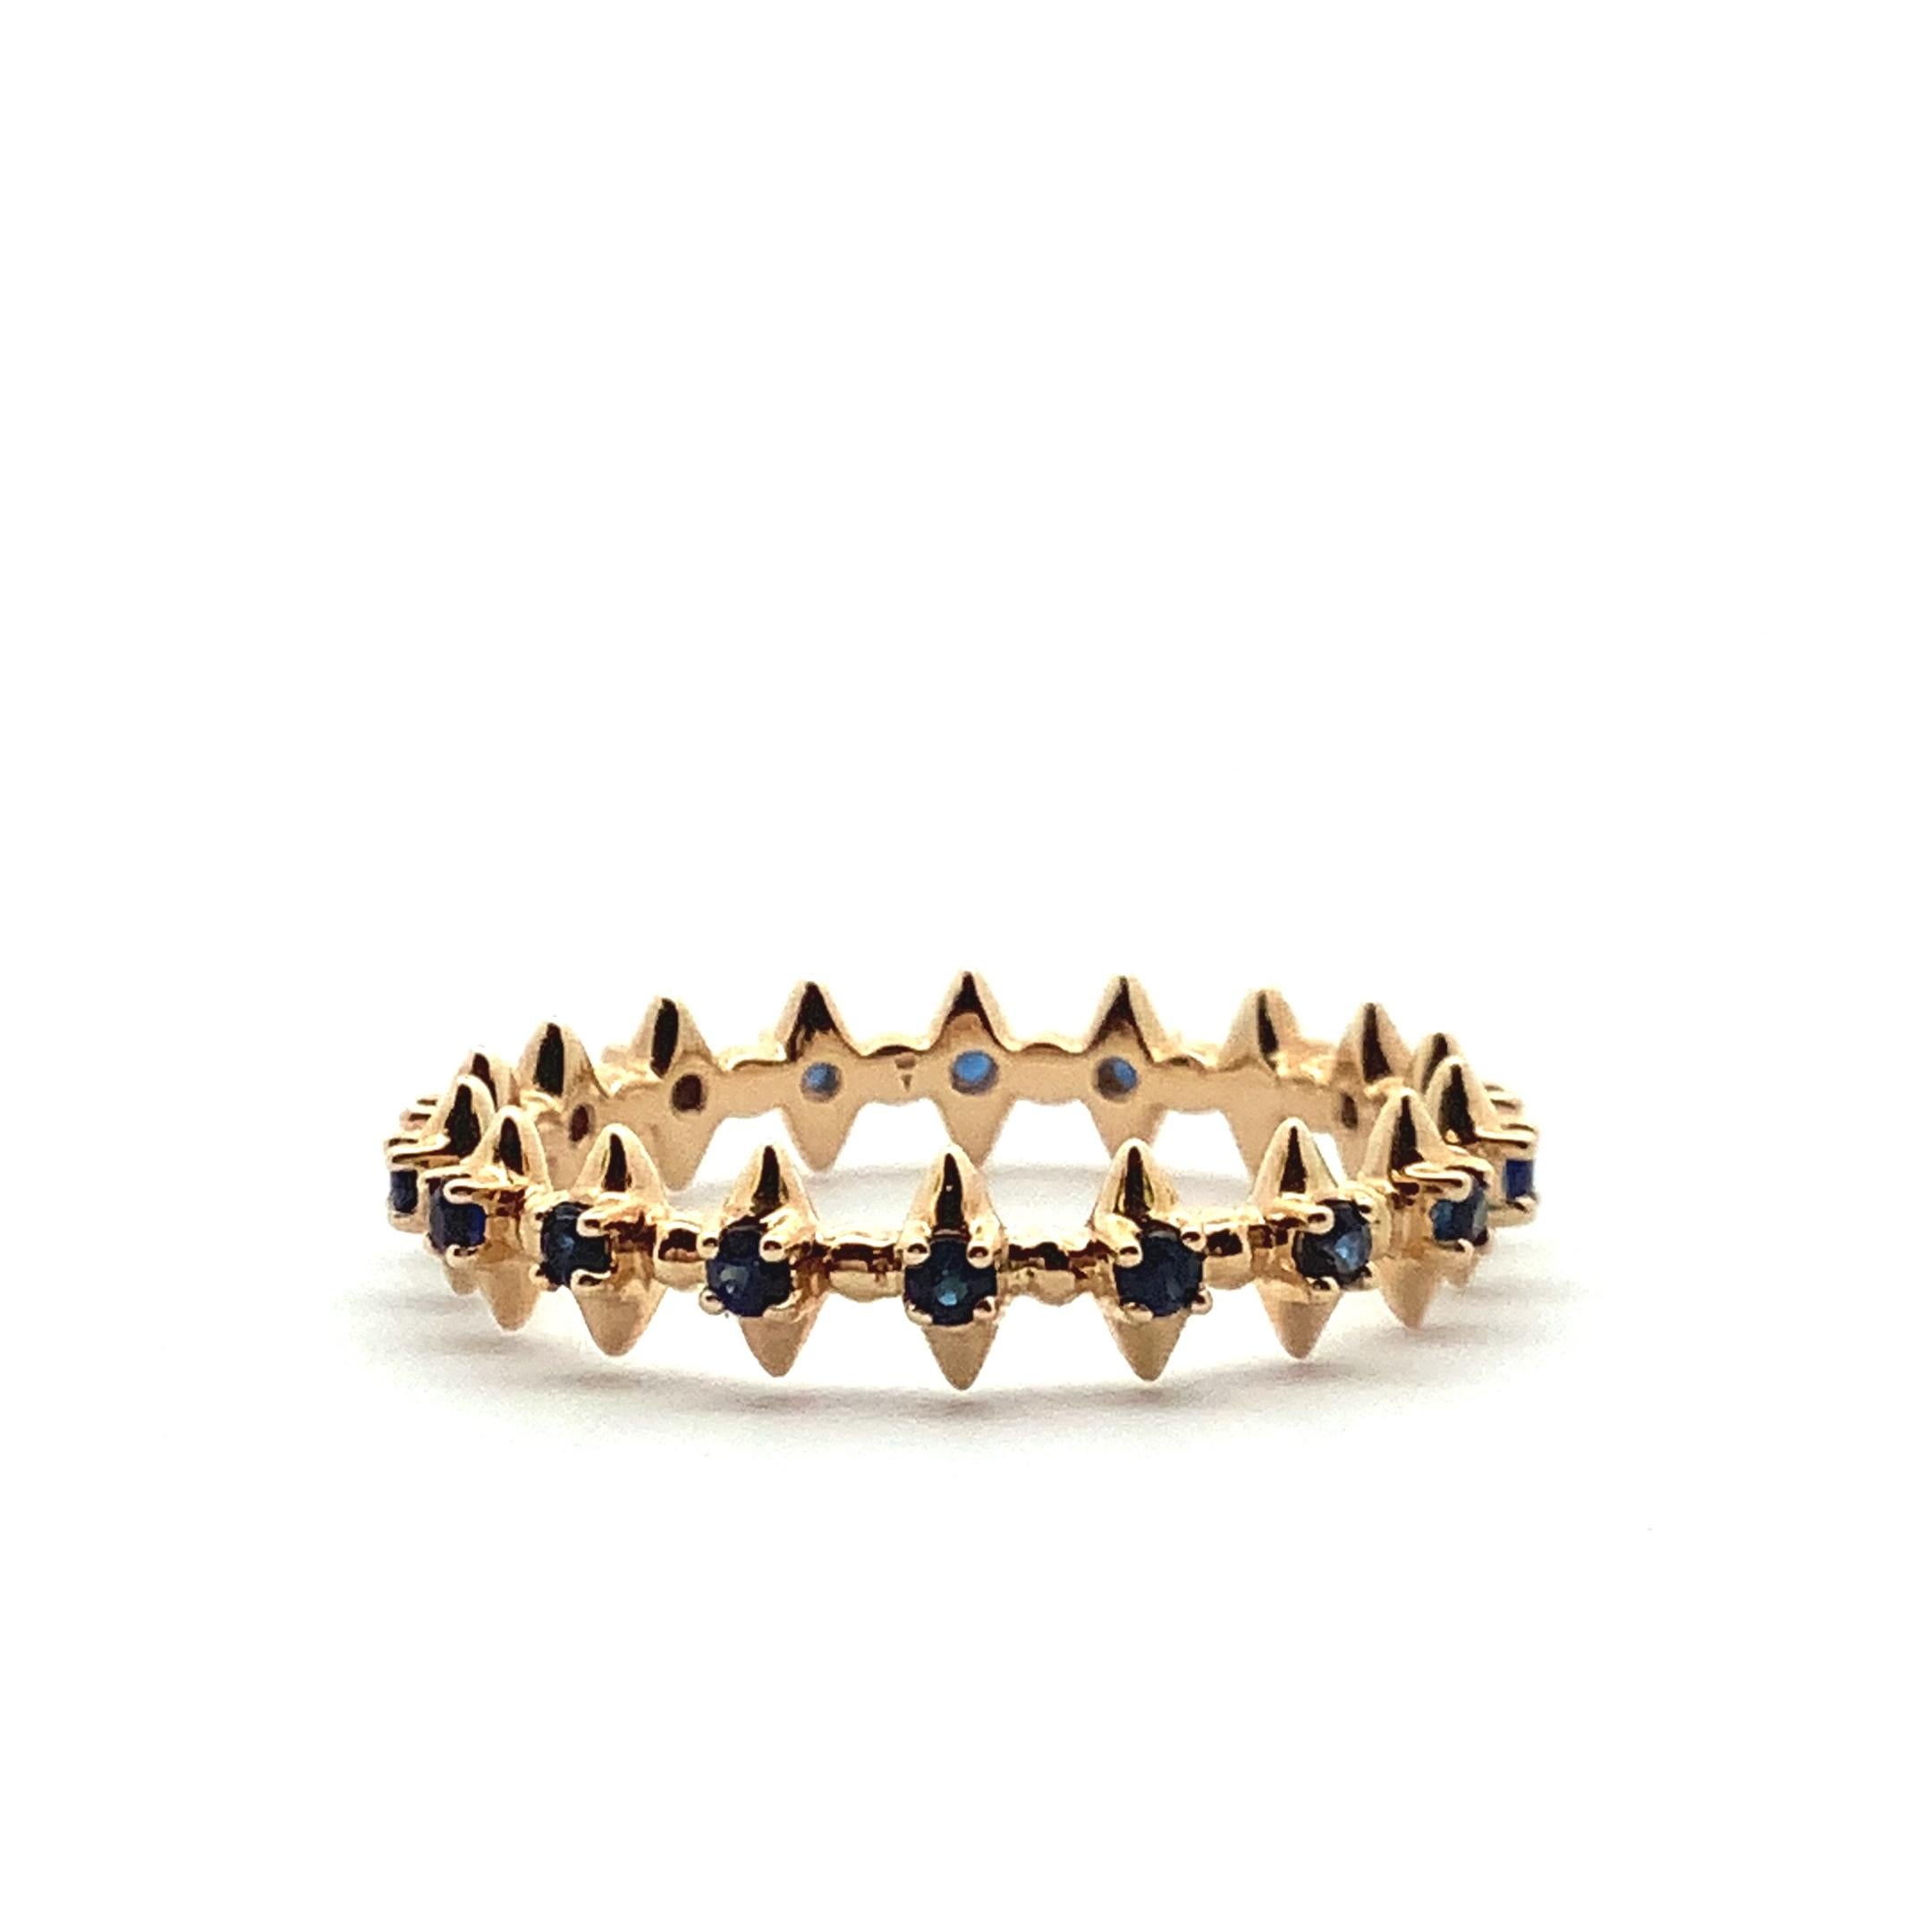 Adina Reyter One of a Kind Thin Spike Sapphire Ring - Y14, Size 6

14k yellow gold eternity ring with sapphires and spikes.

Band measures approximately 4 mm at the widest.

Total Sapphire Carat Weight: 0.32 gtc

